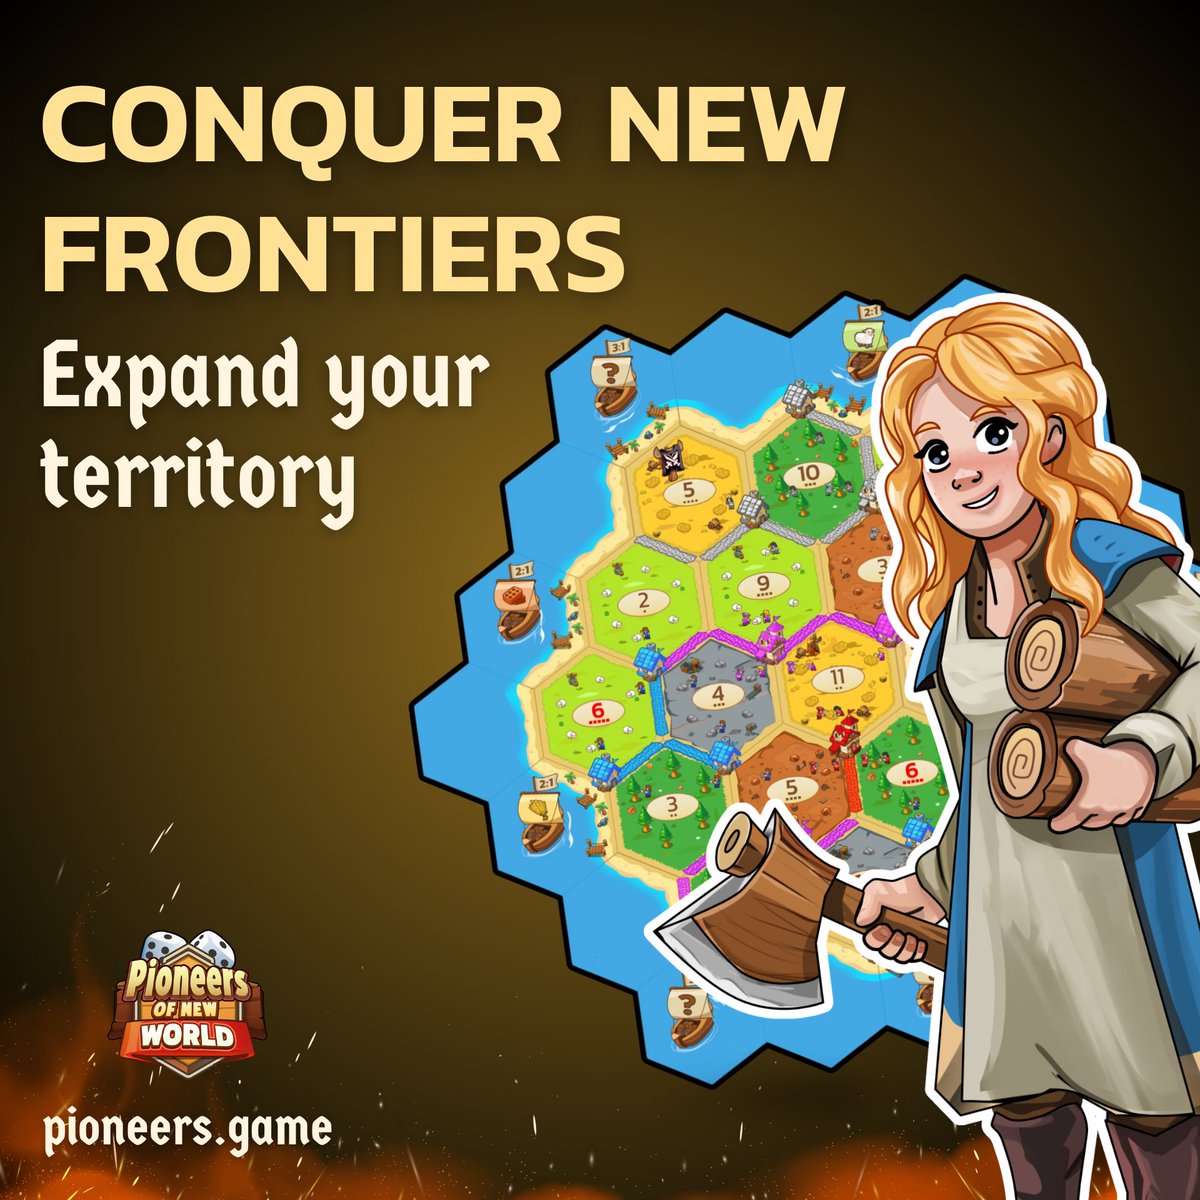 🌍 Pioneers, the New World awaits you!

Establish your settlements🏙️, link them up with roads🛣️, and secure ports to improve your trade⚓️!

Sign up today ➡️ pioneers.game

#PioneersOfTheNewWorld #IndieGames #WipWednesday